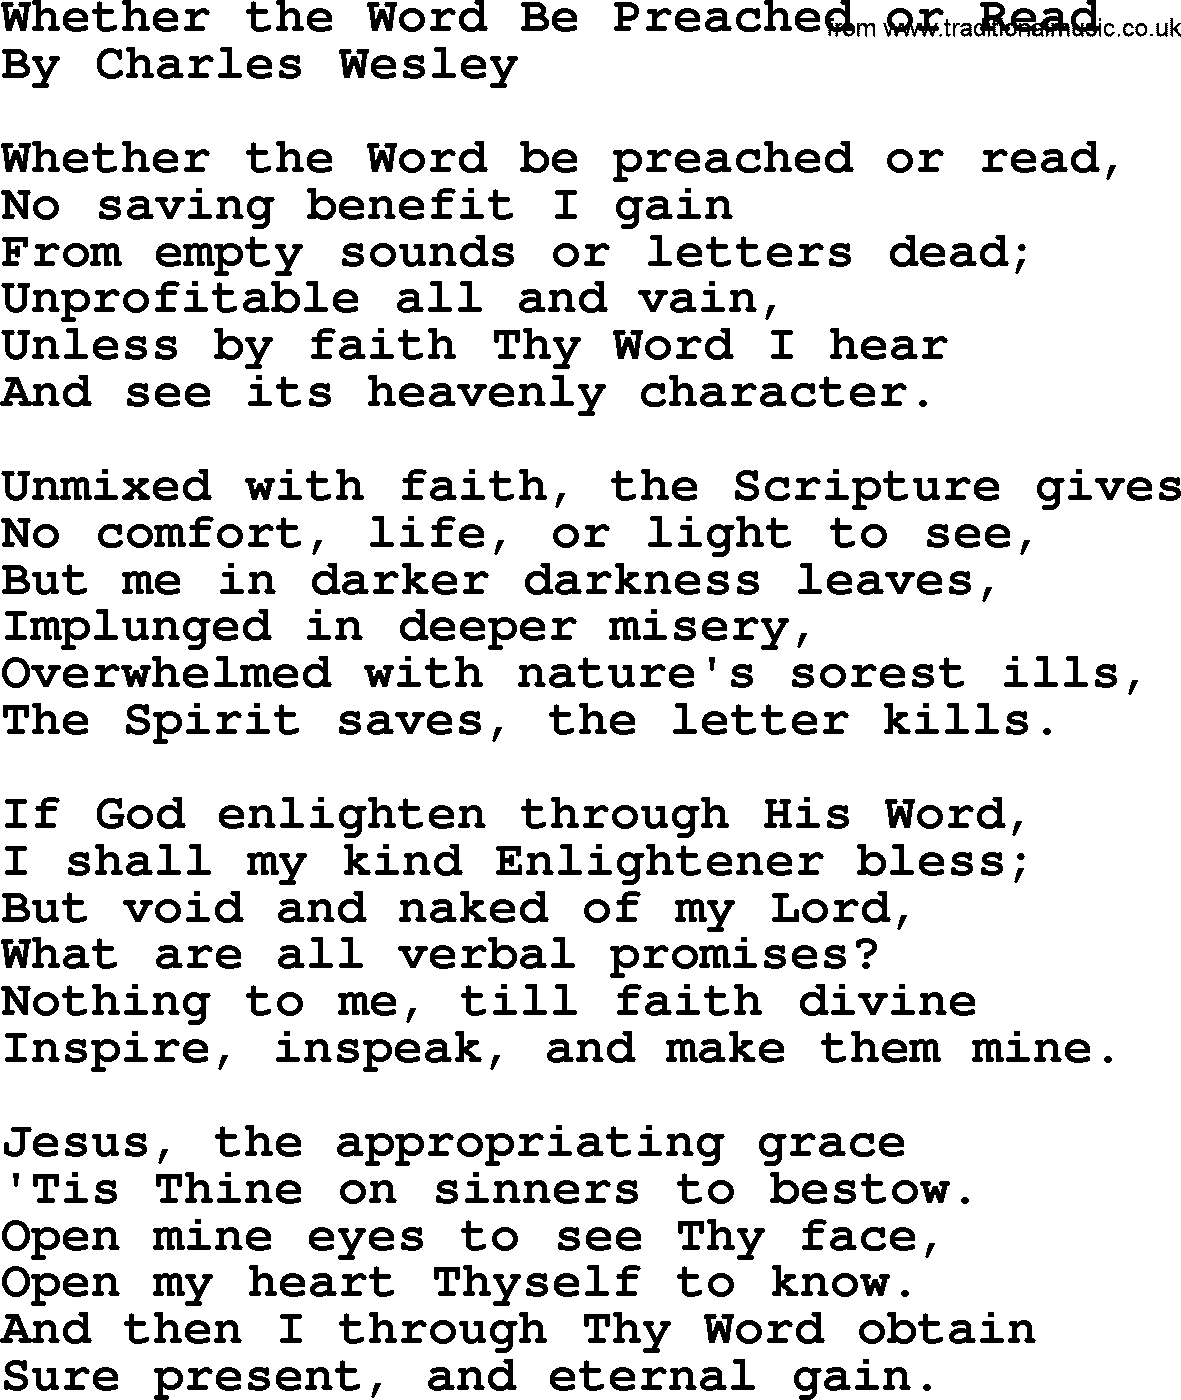 Charles Wesley hymn: Whether the Word Be Preached or Read, lyrics